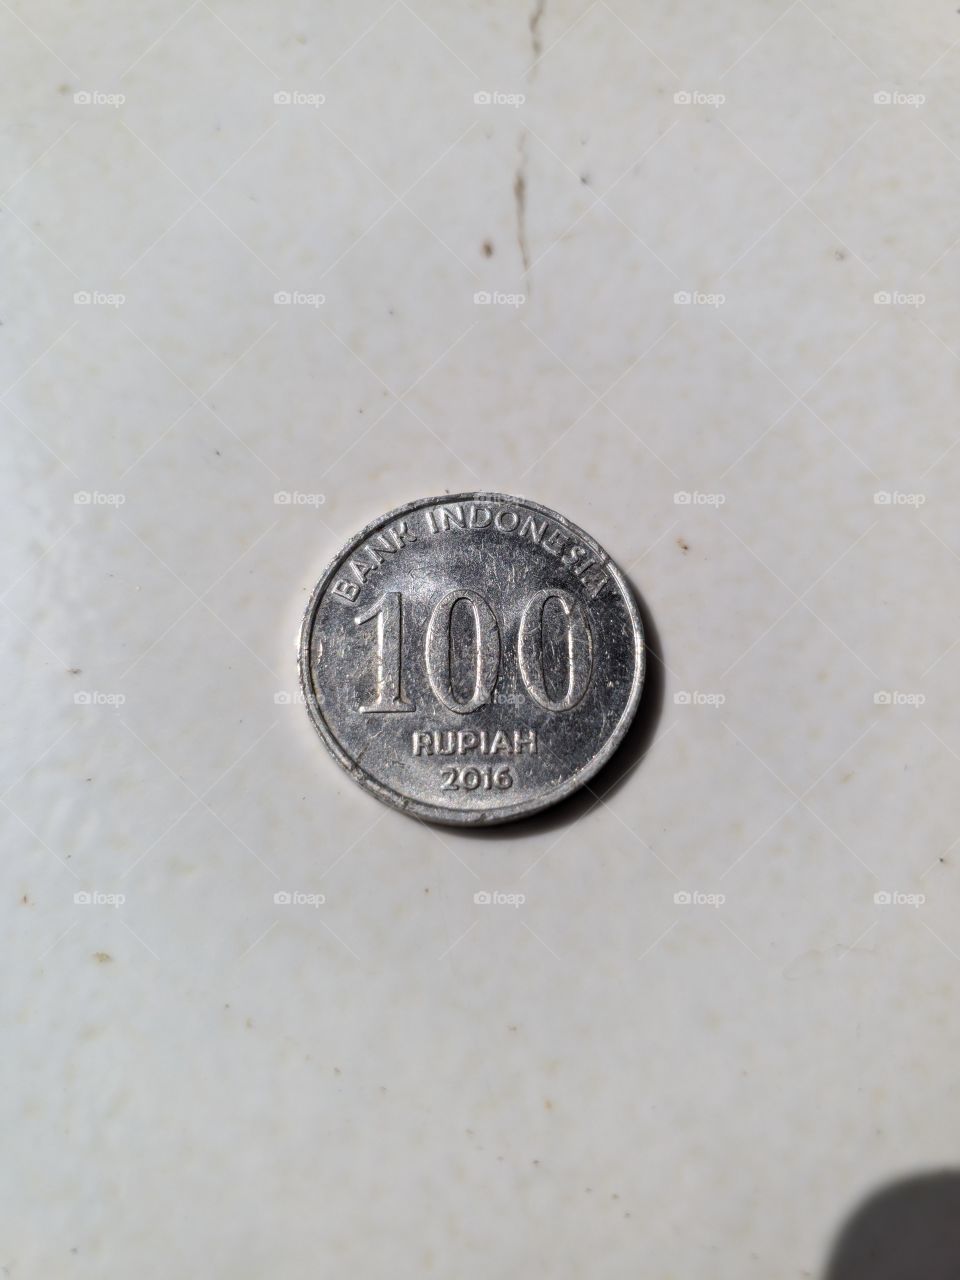 Indonesian currency rupiah coin one hundred rupiah